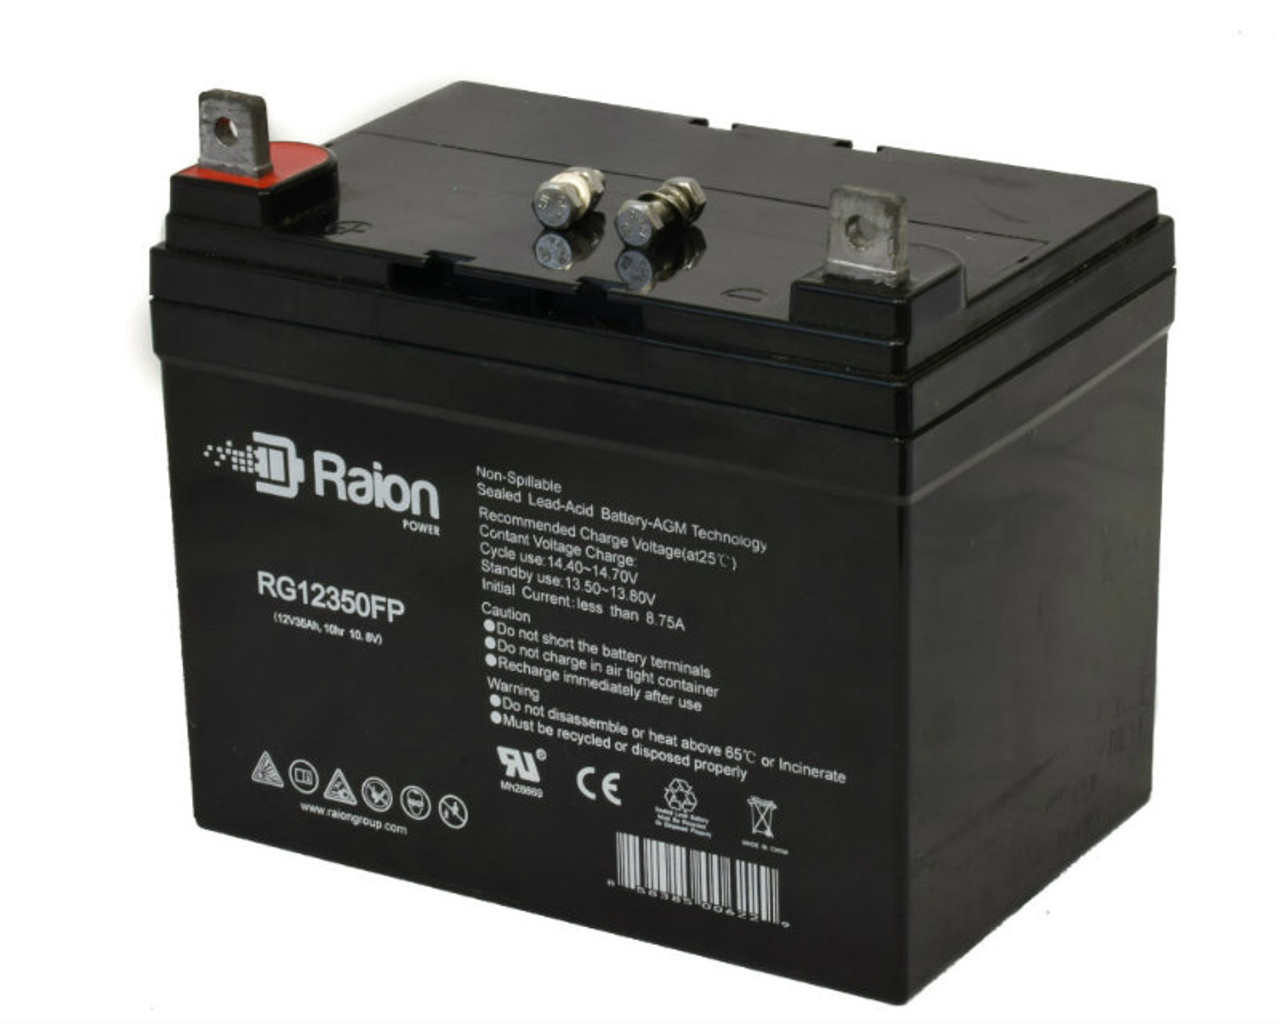 Raion Power Replacement 12V 35Ah RG12350FP Battery for Wei Long U132